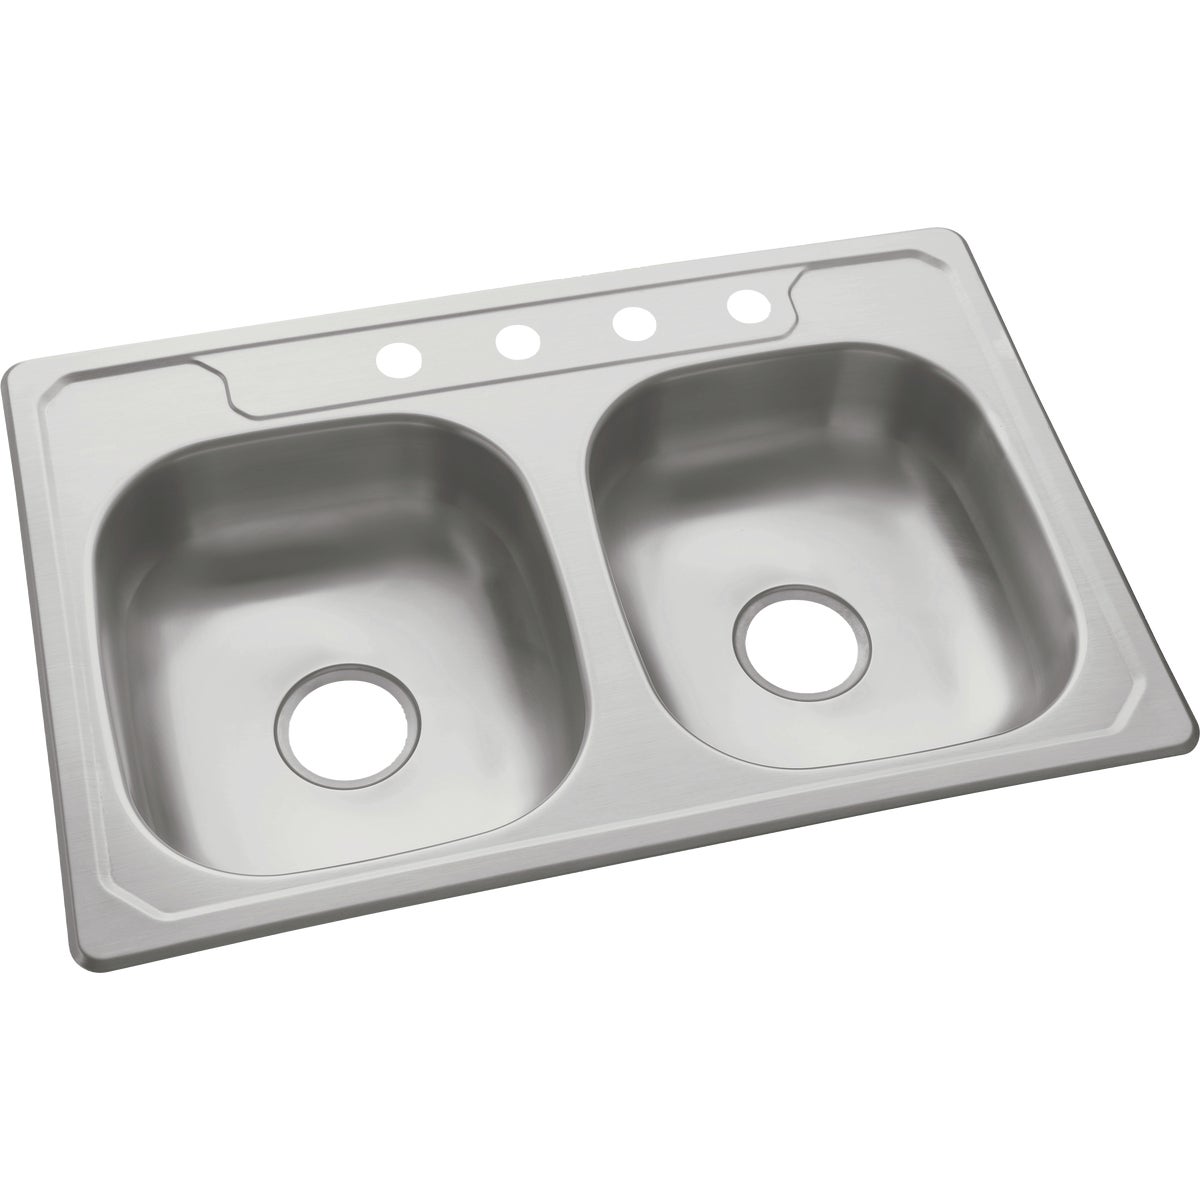 Sterling Middleton Double Bowl 33 In. x 22 In. x 6 In. Deep Stainless Steel Top Mount Kitchen Sink